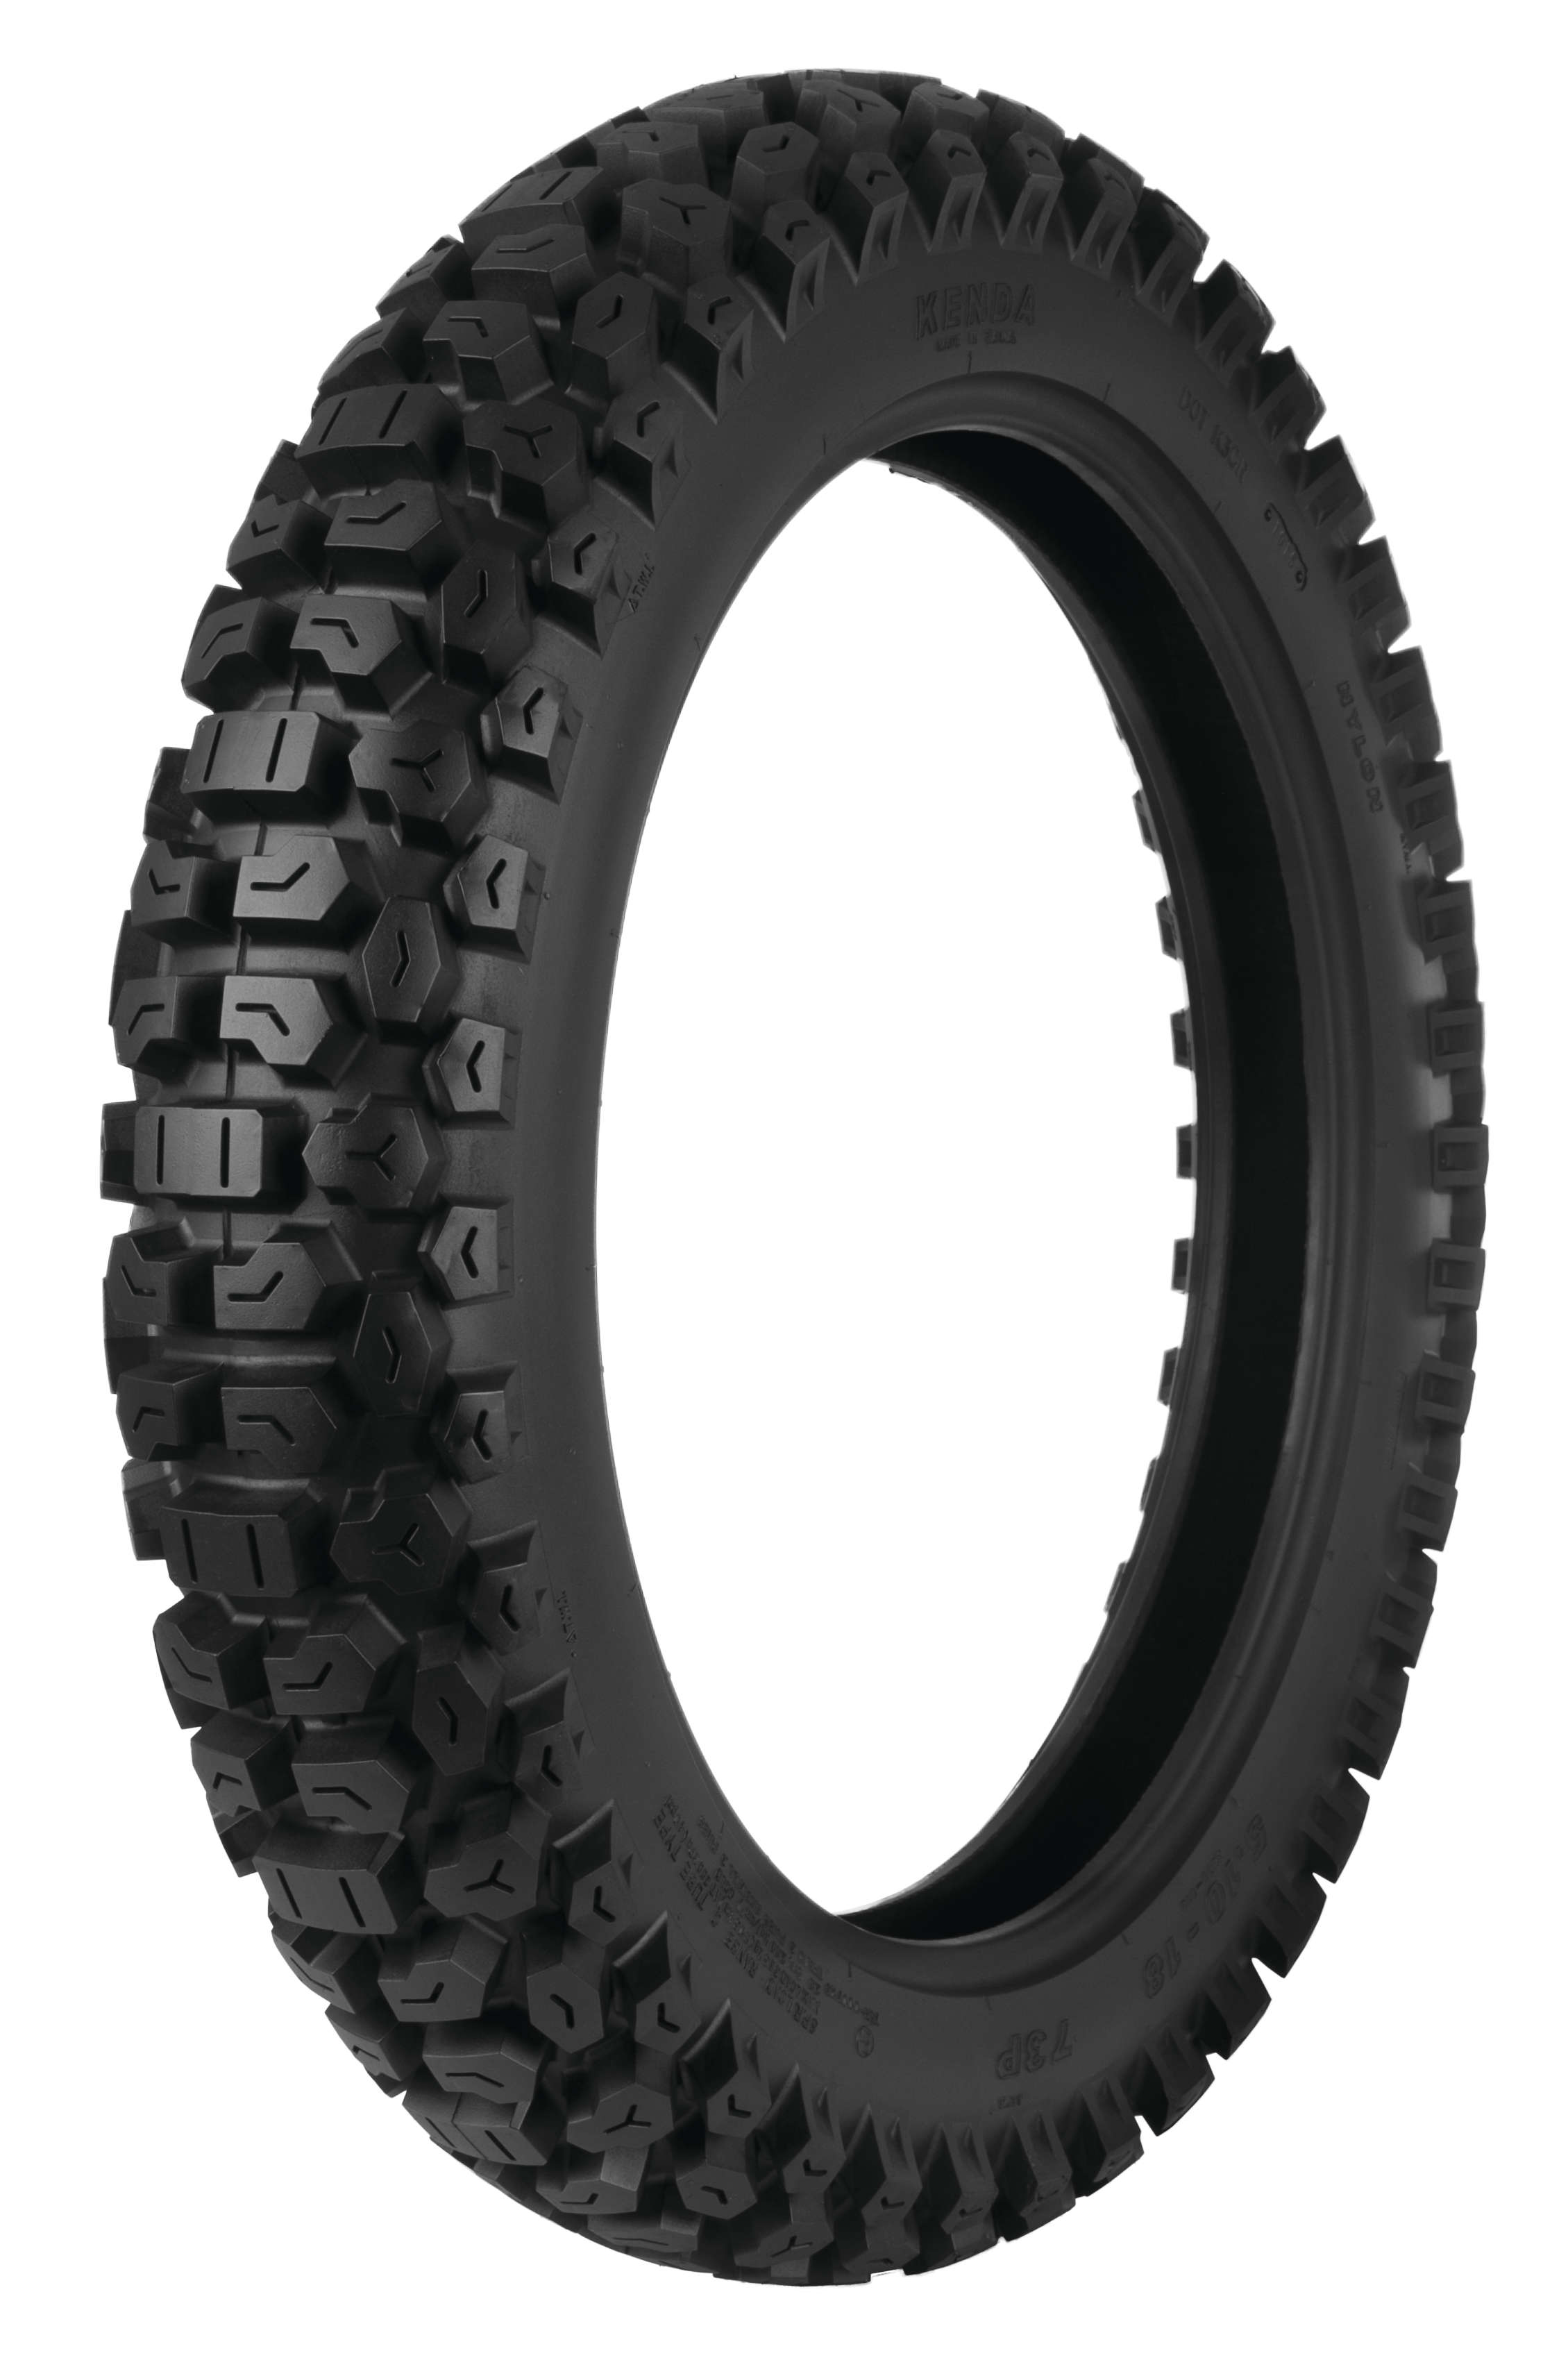 K270 Dual Sport 4.60-18 Rear Tire - Click Image to Close